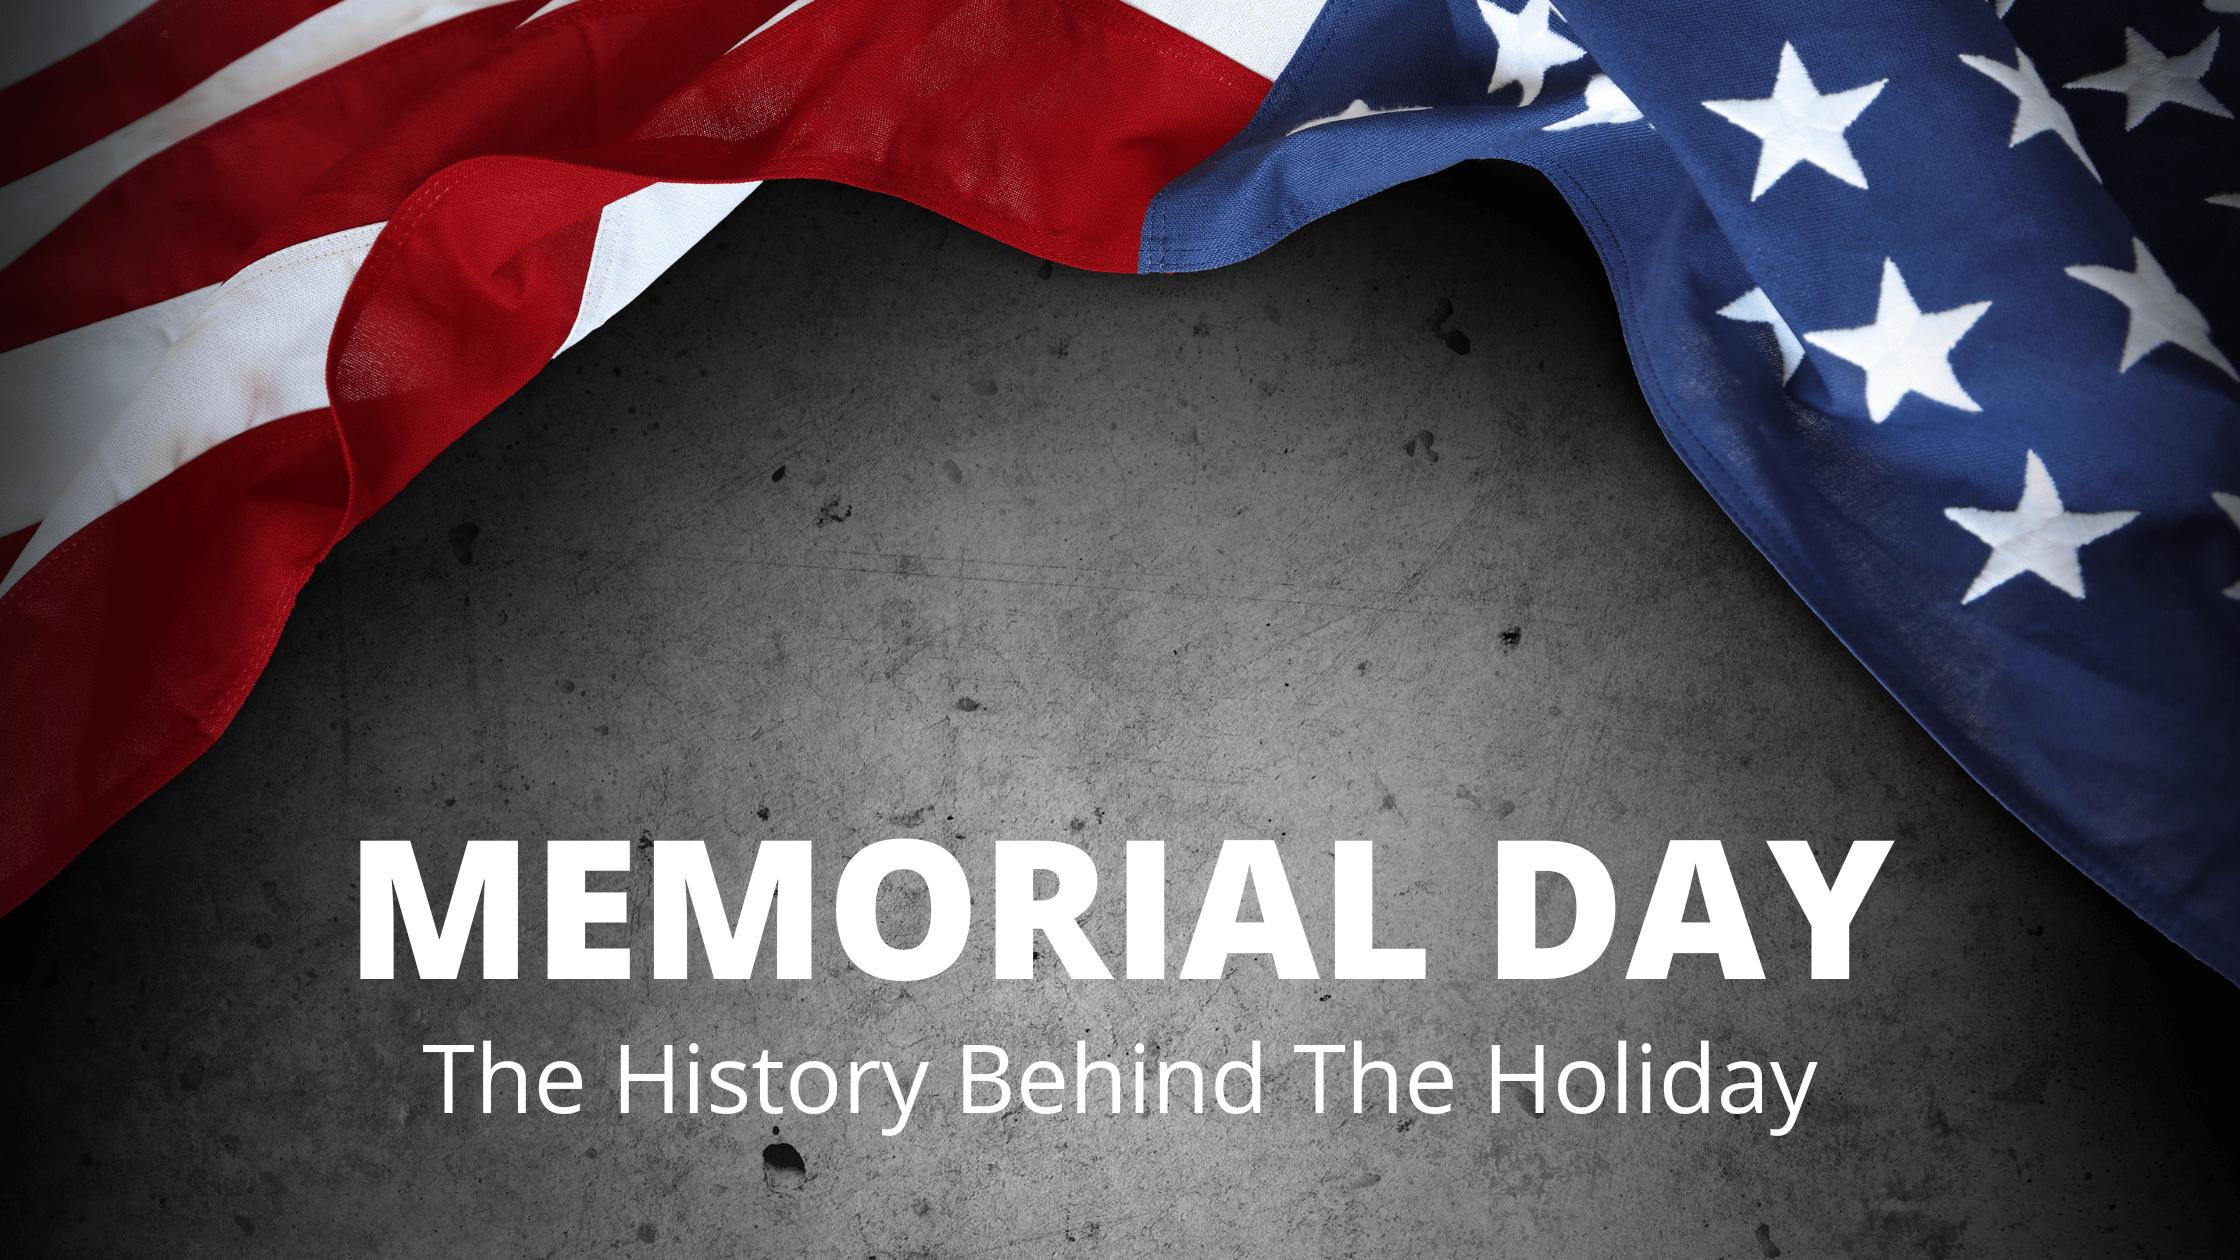 Memorial Day Holiday in the U.S.